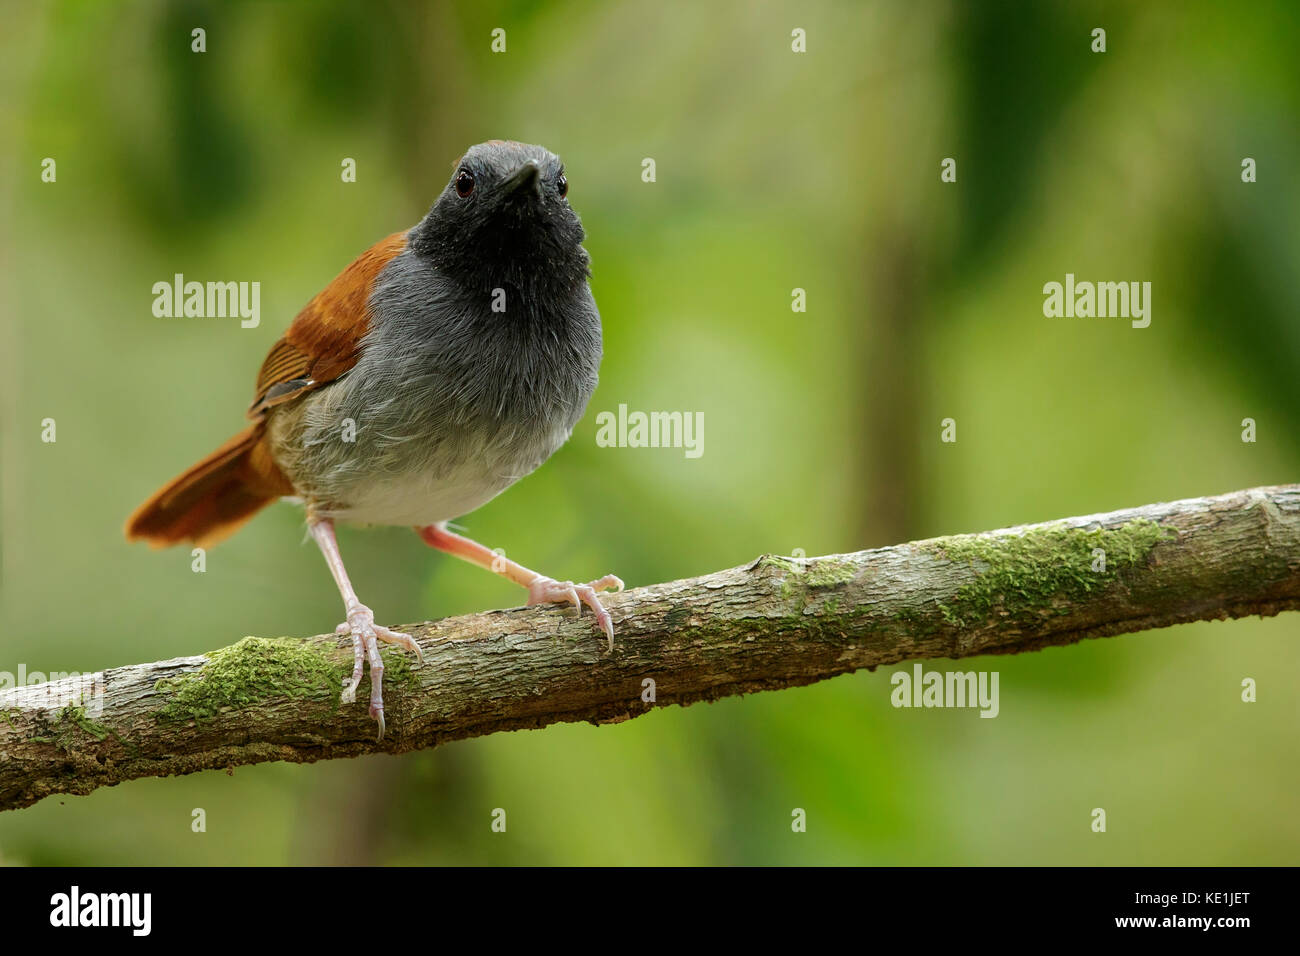 White-bellied Antbird (Myrmeciza longipes) perched on a branch in the grasslands of Guyana. Stock Photo